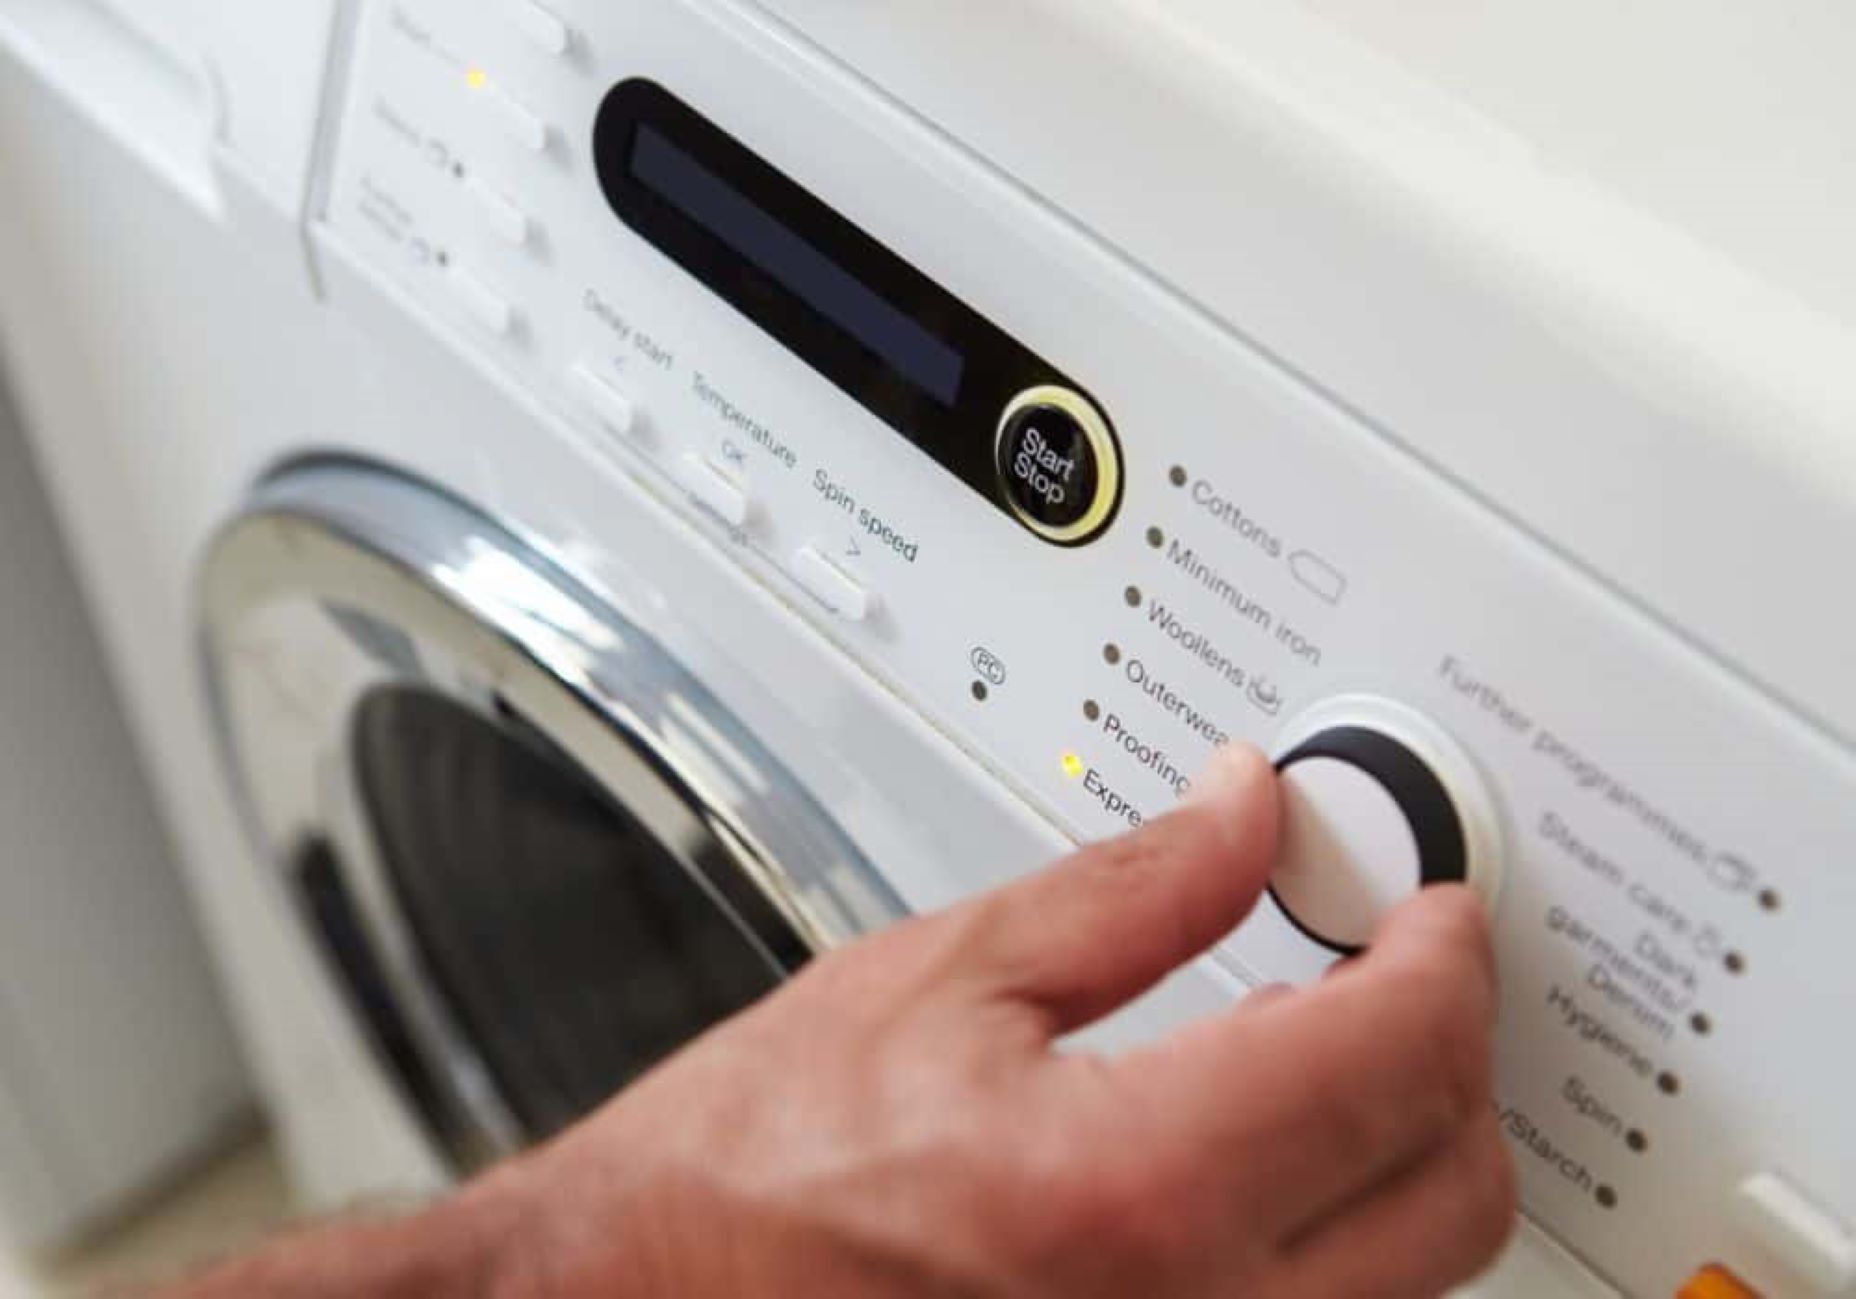 How To Fix The Error Code E2 For Whirlpool Dryer